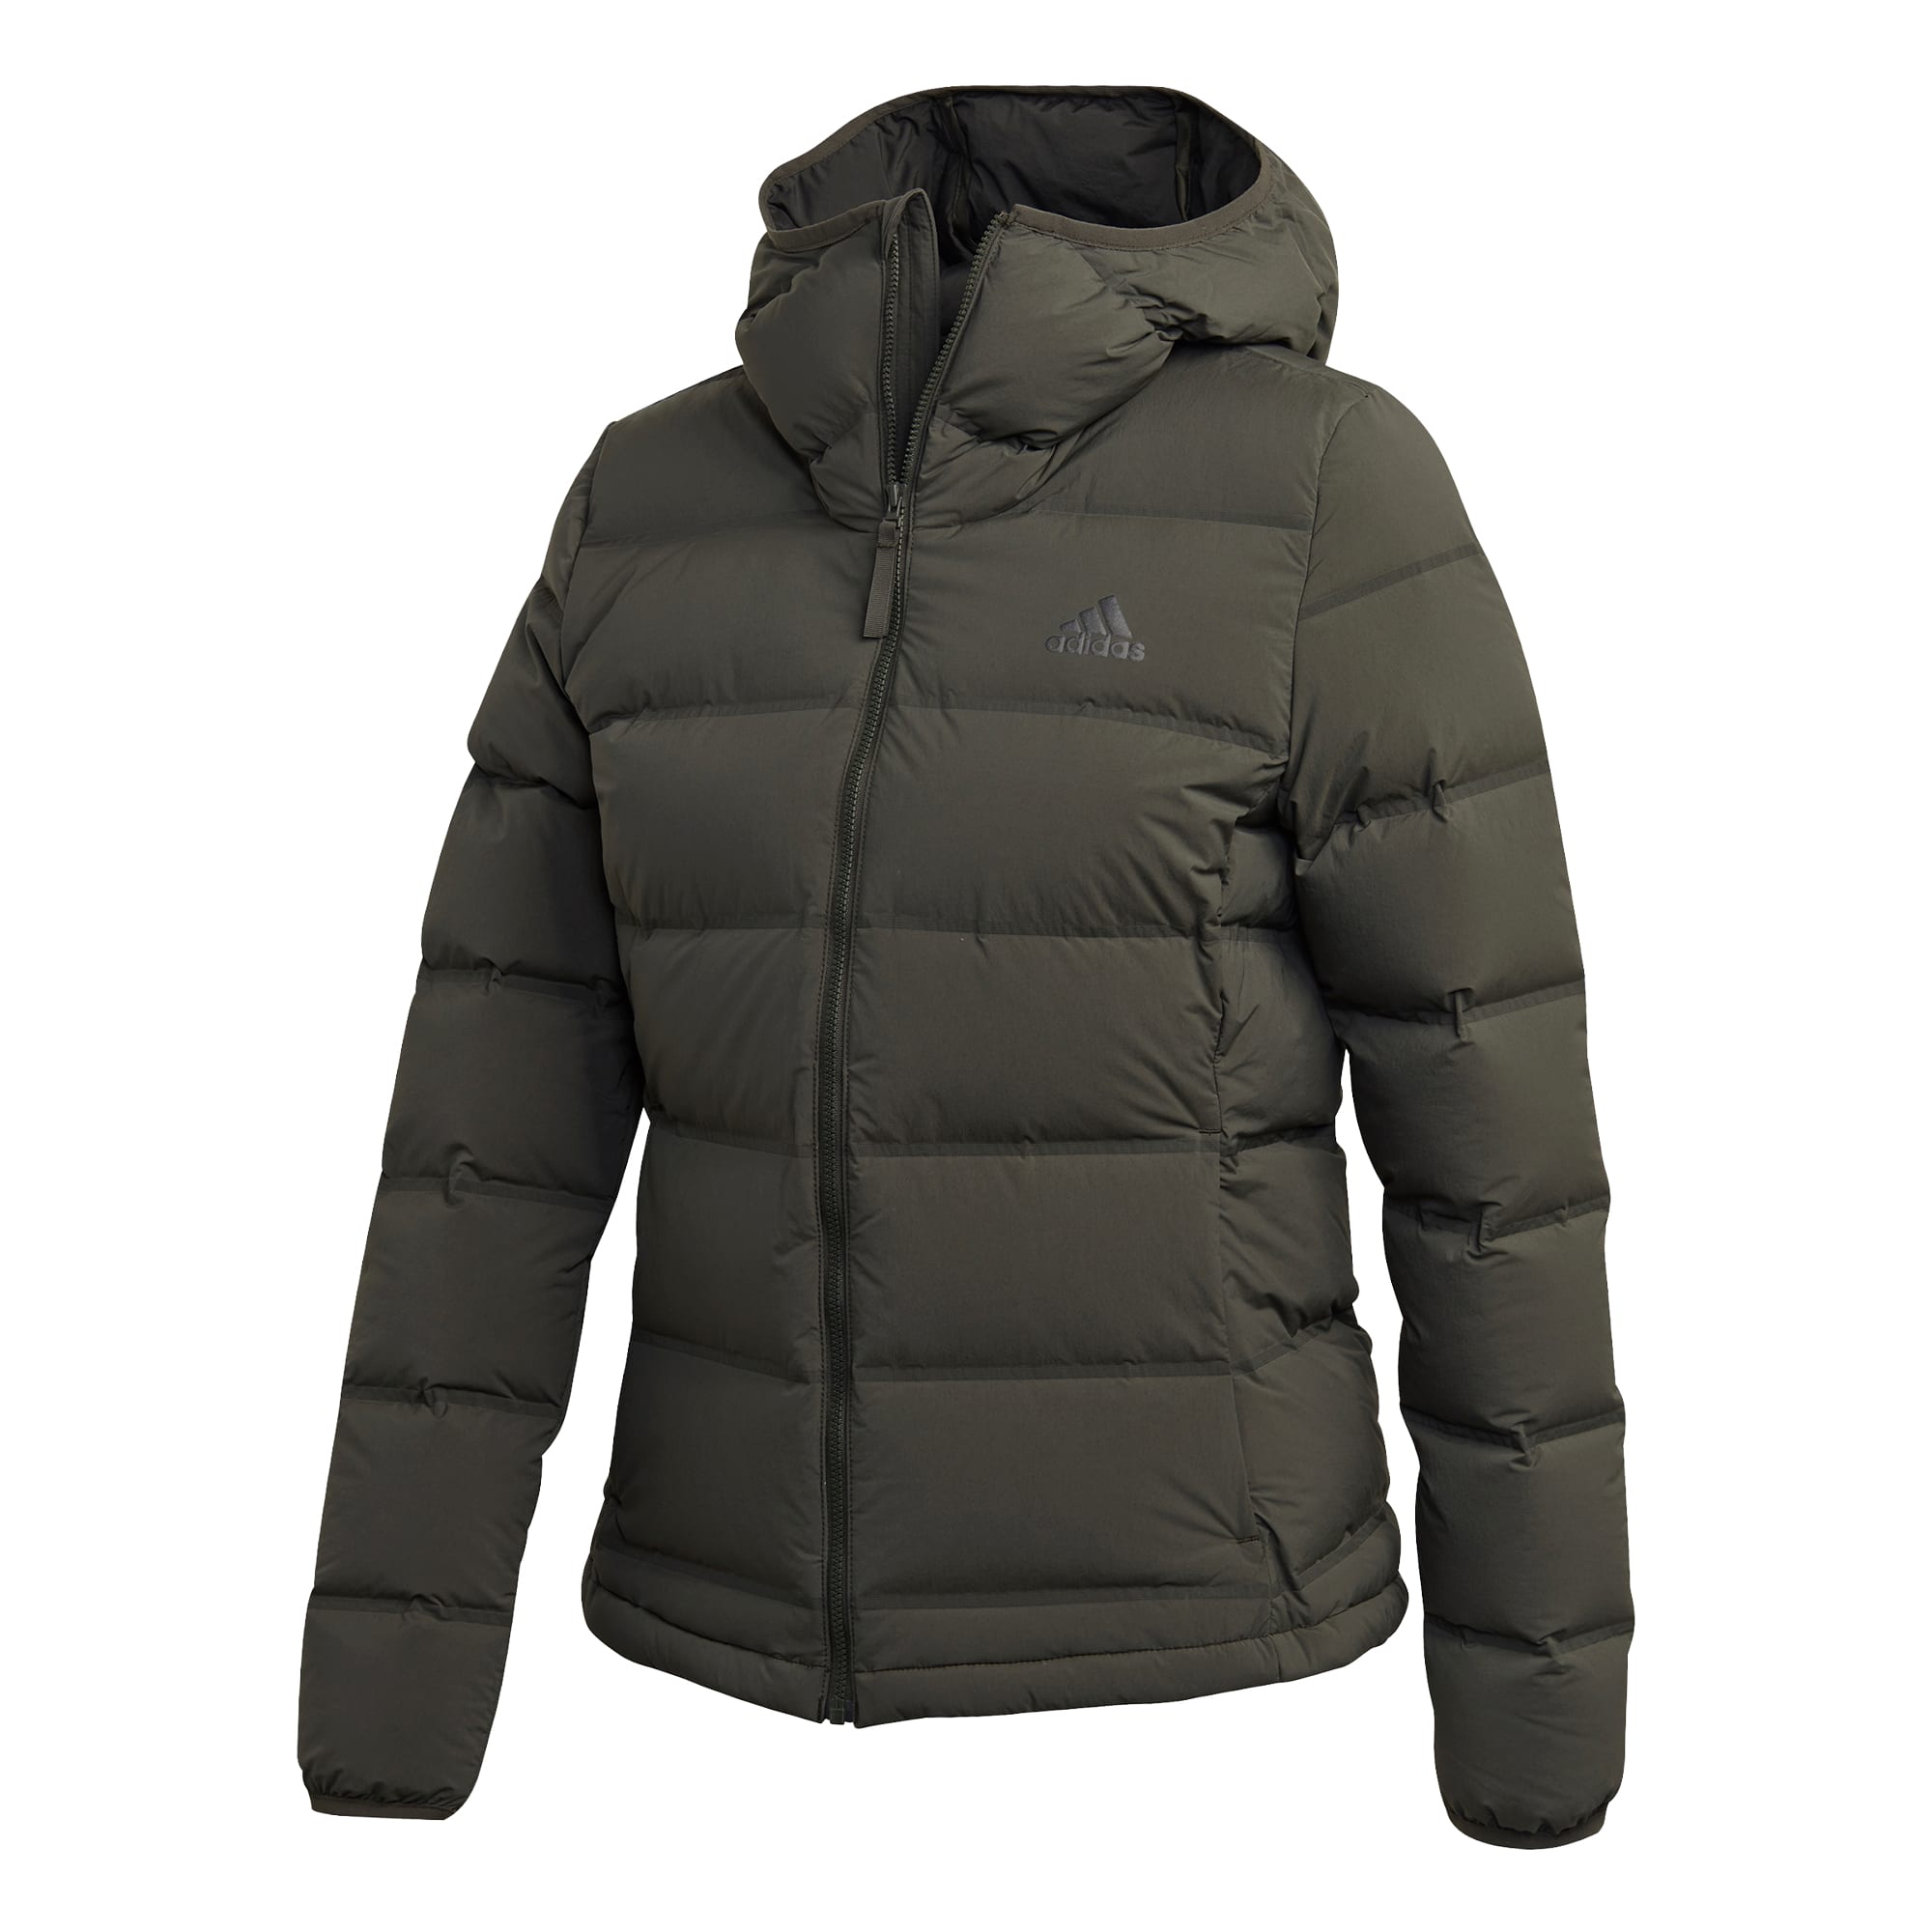 Buy ADIDAS Women's Helionic Soft Hooded Down Jacket from Outnorth